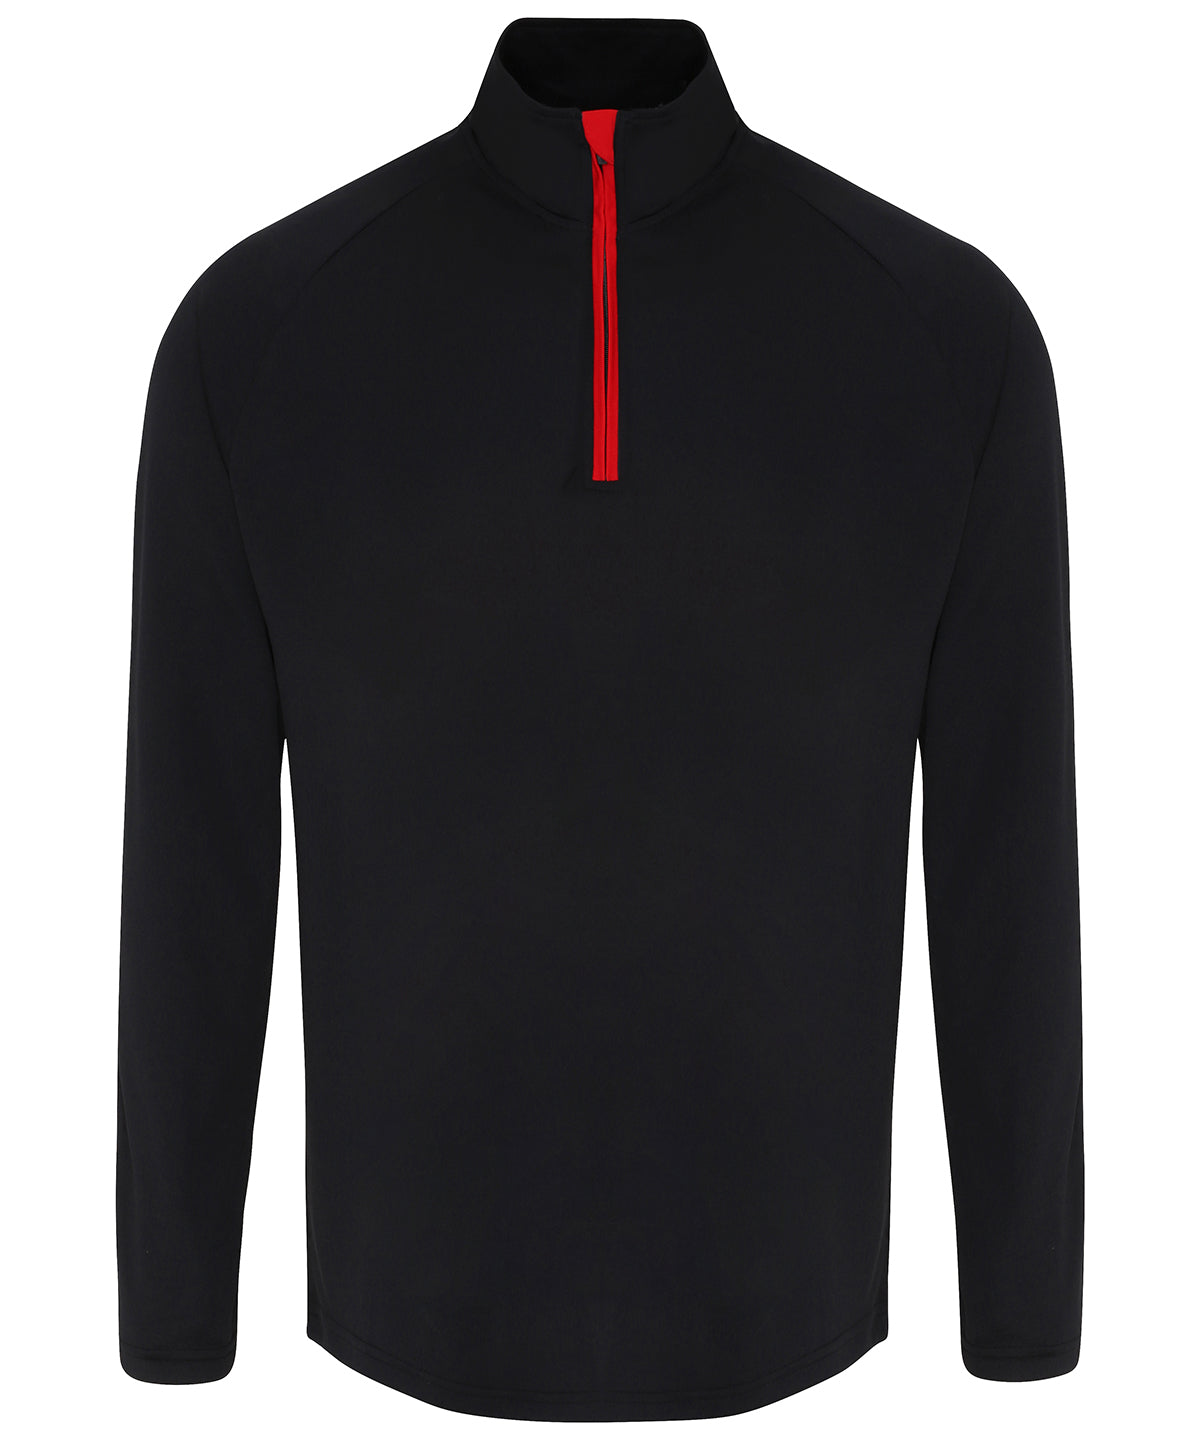 Black/Red - TriDri® long sleeve performance ¼ zip Sports Overtops TriDri® Activewear & Performance, Athleisurewear, Back to Fitness, Exclusives, Must Haves, Outdoor Sports, Plus Sizes, Rebrandable, Sports & Leisure, Team Sportswear, UPF Protection Schoolwear Centres